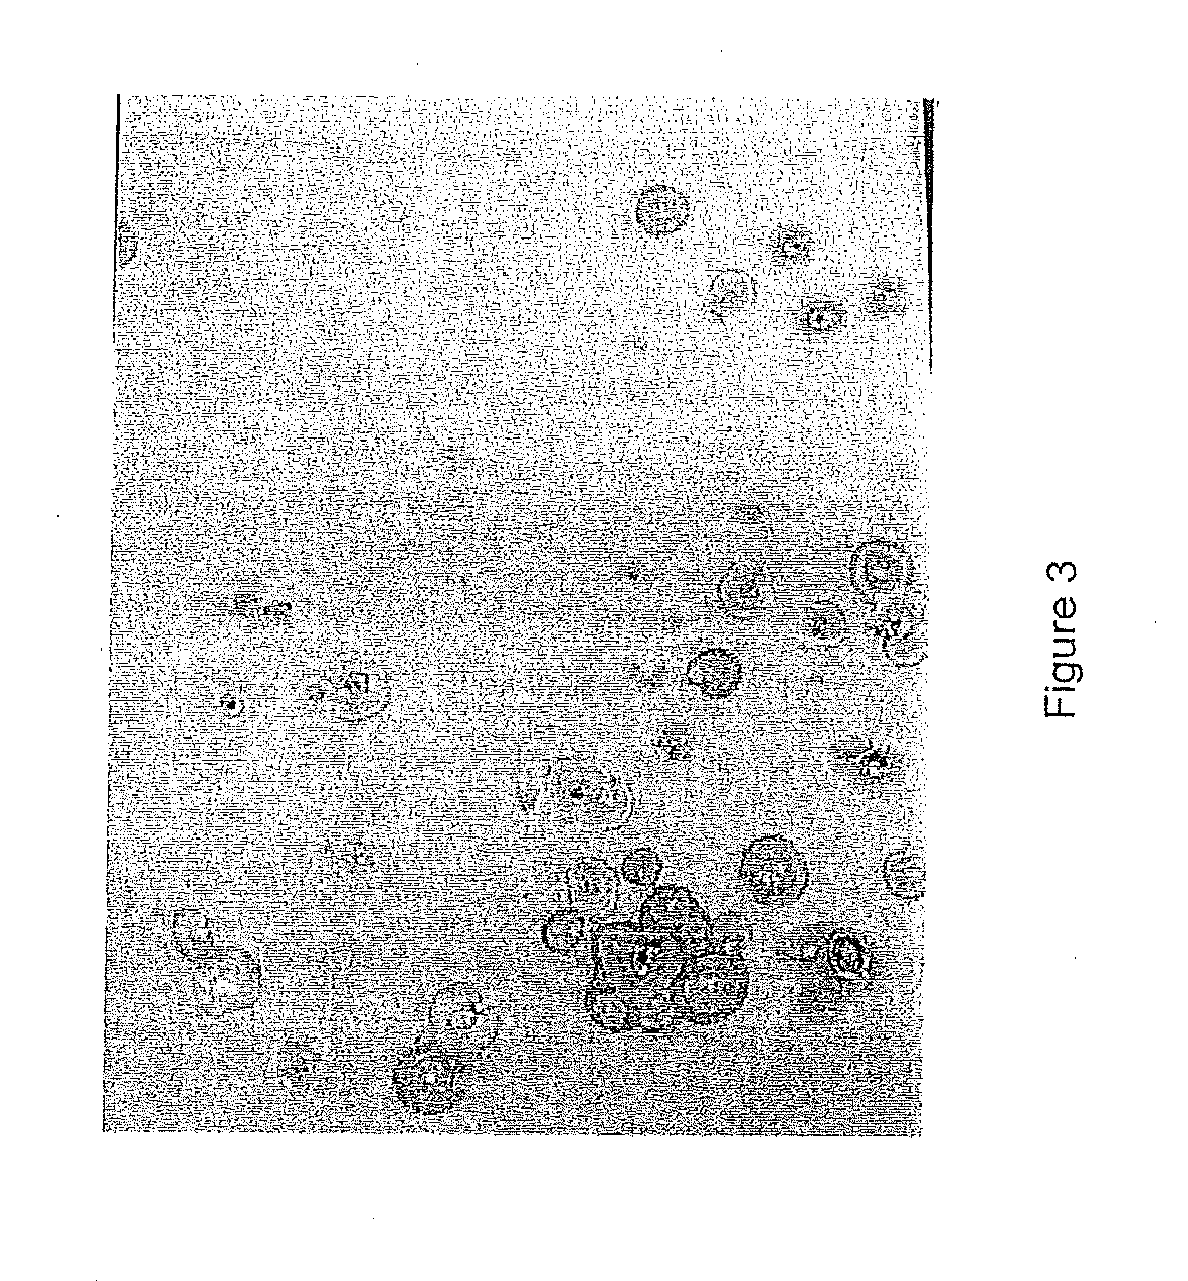 Method for producing molded bodies from sheet steel galvanized on one or both sides